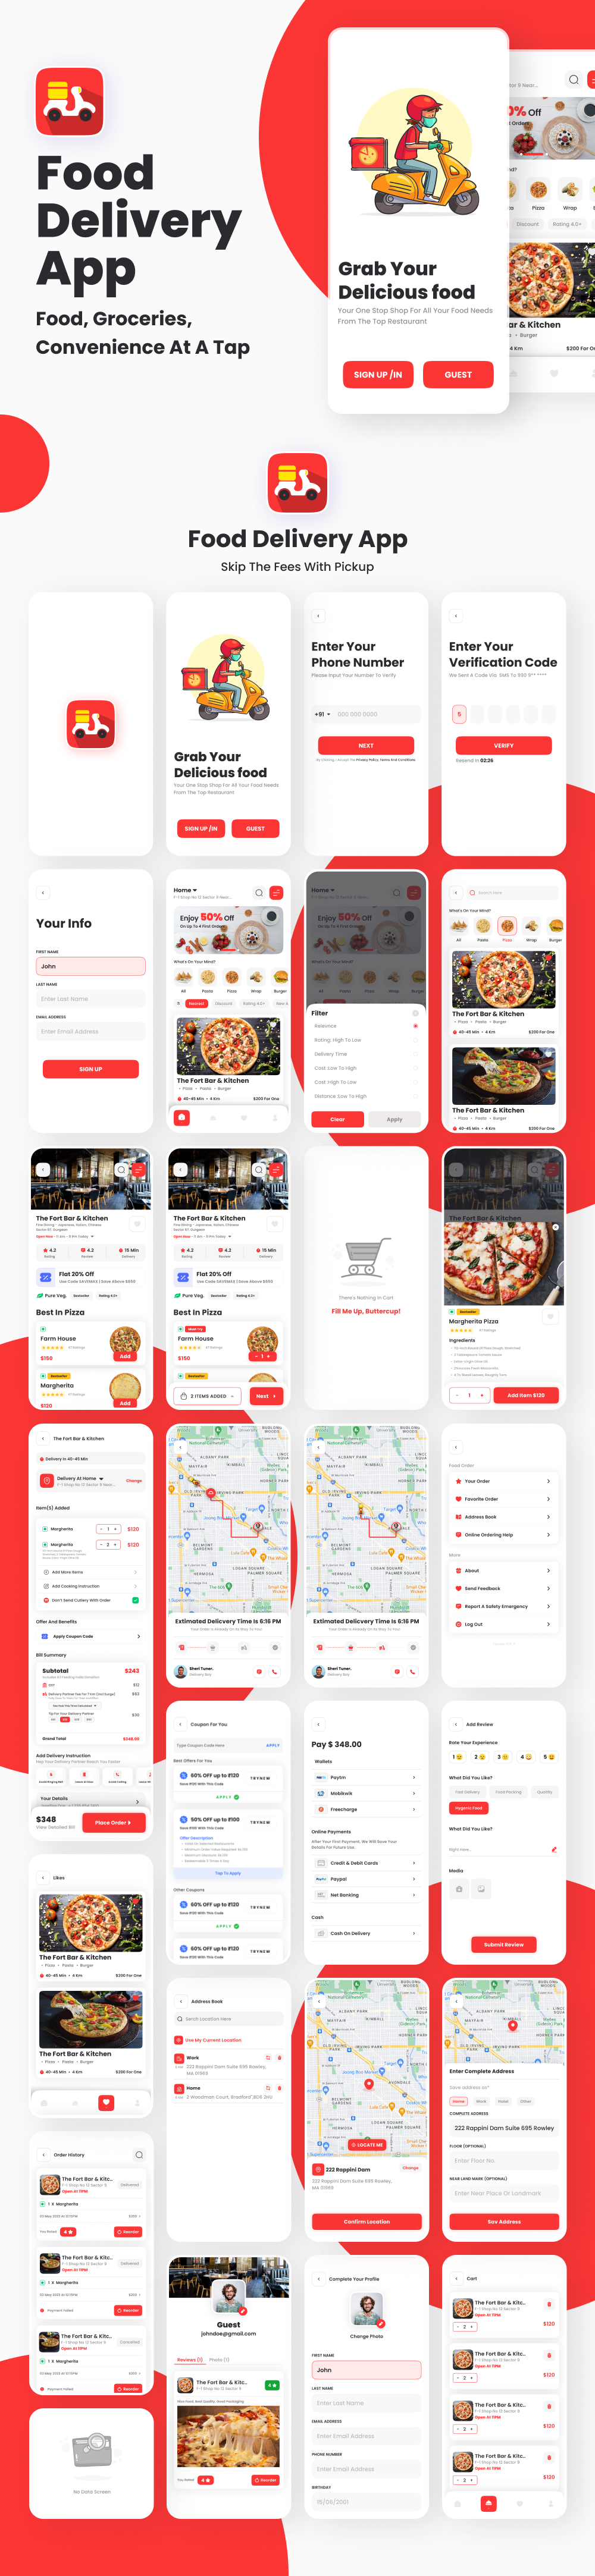 Food Delivery App UI Template - Android - 1